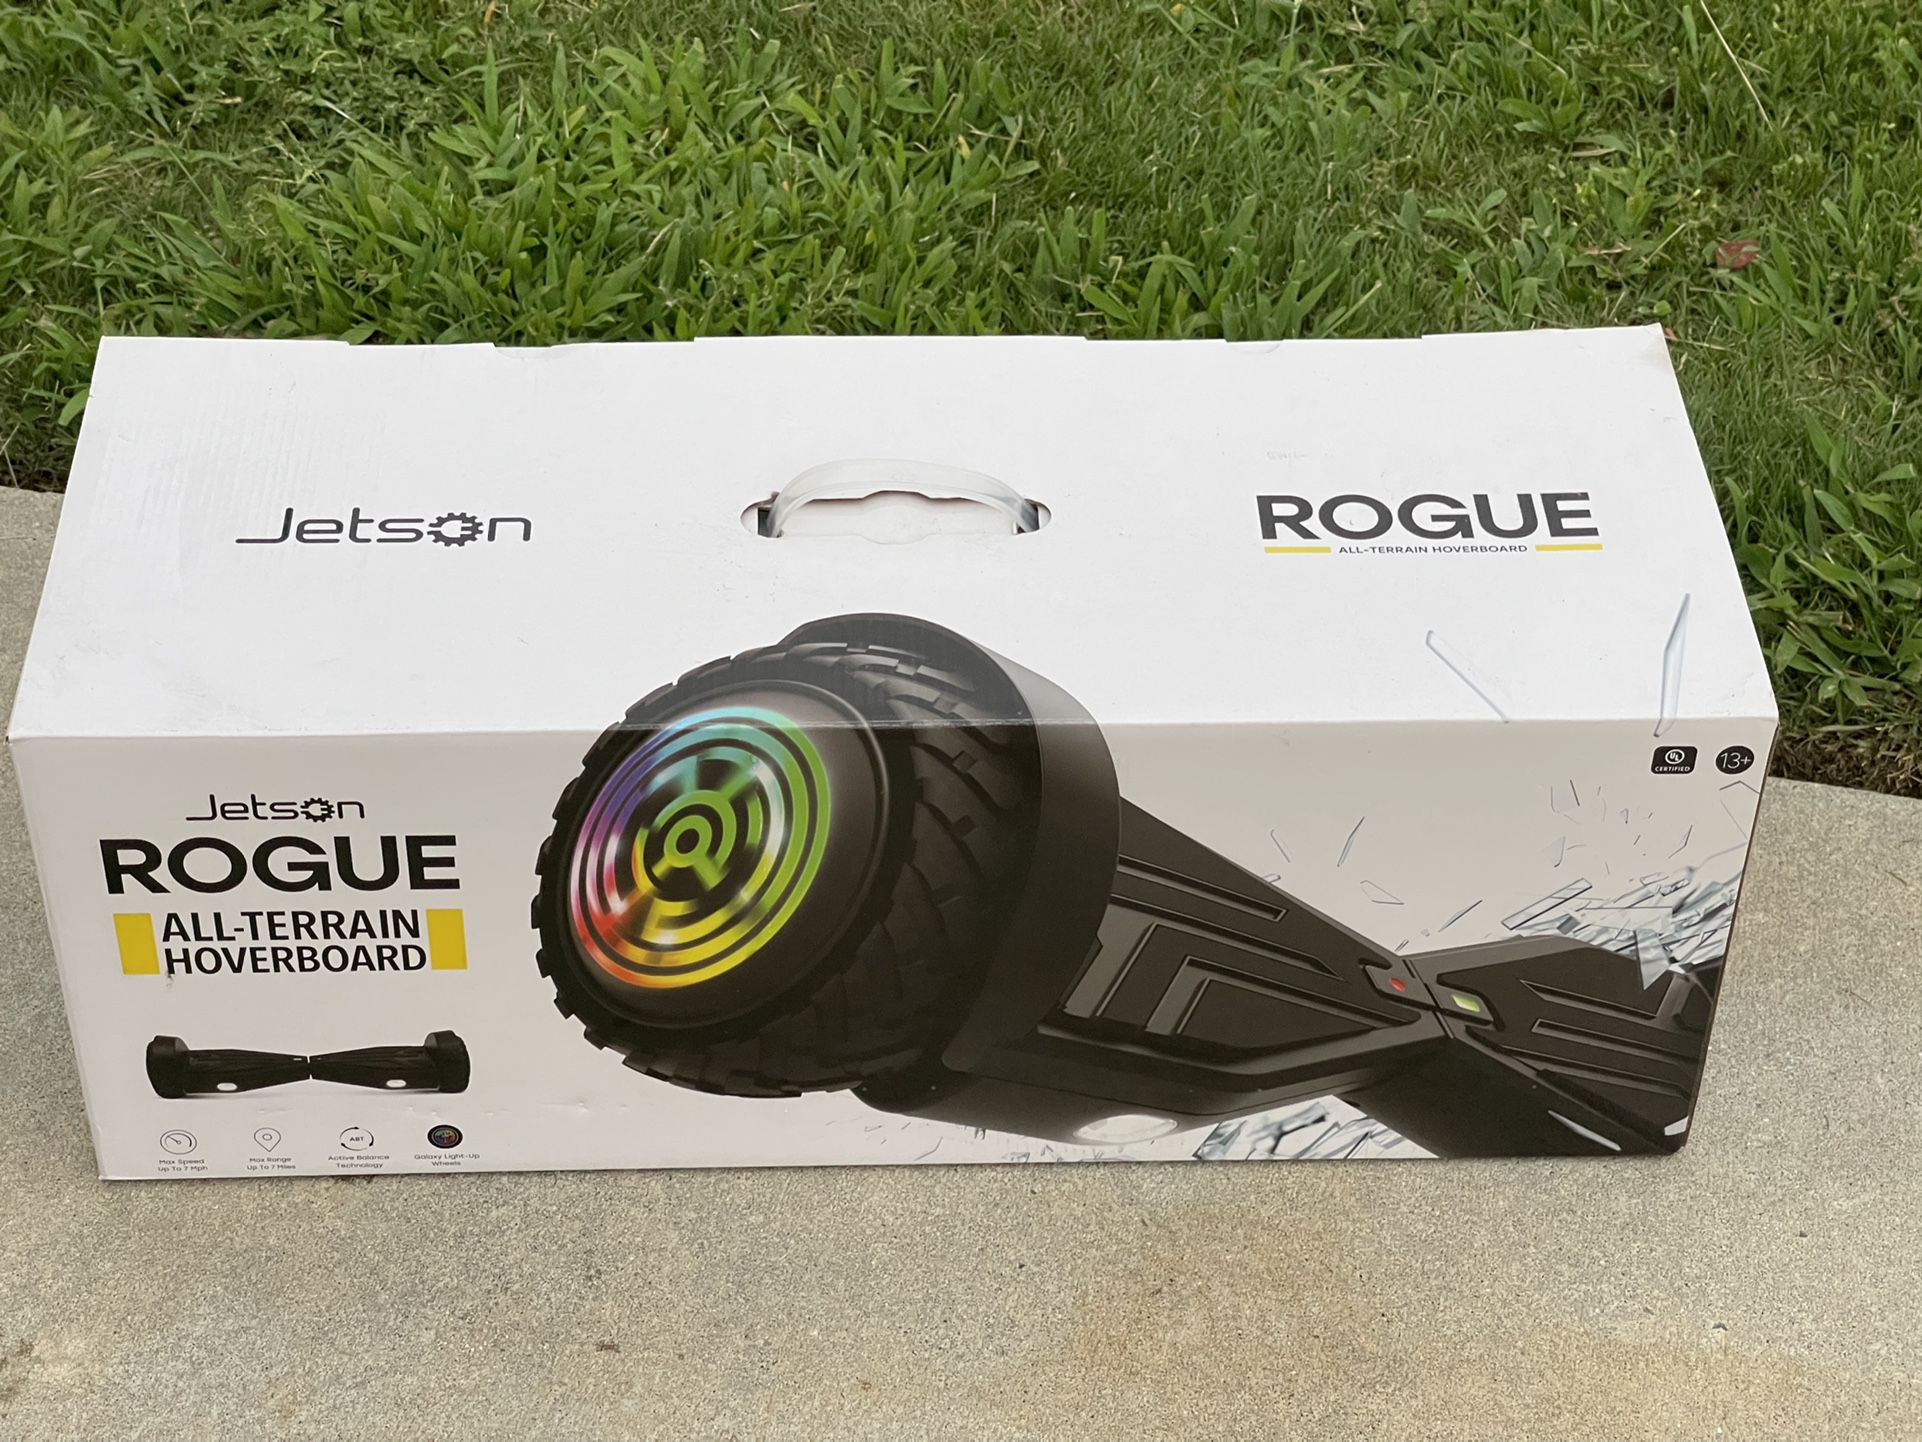 Jetson Rogue All-terrain Hoverboard 